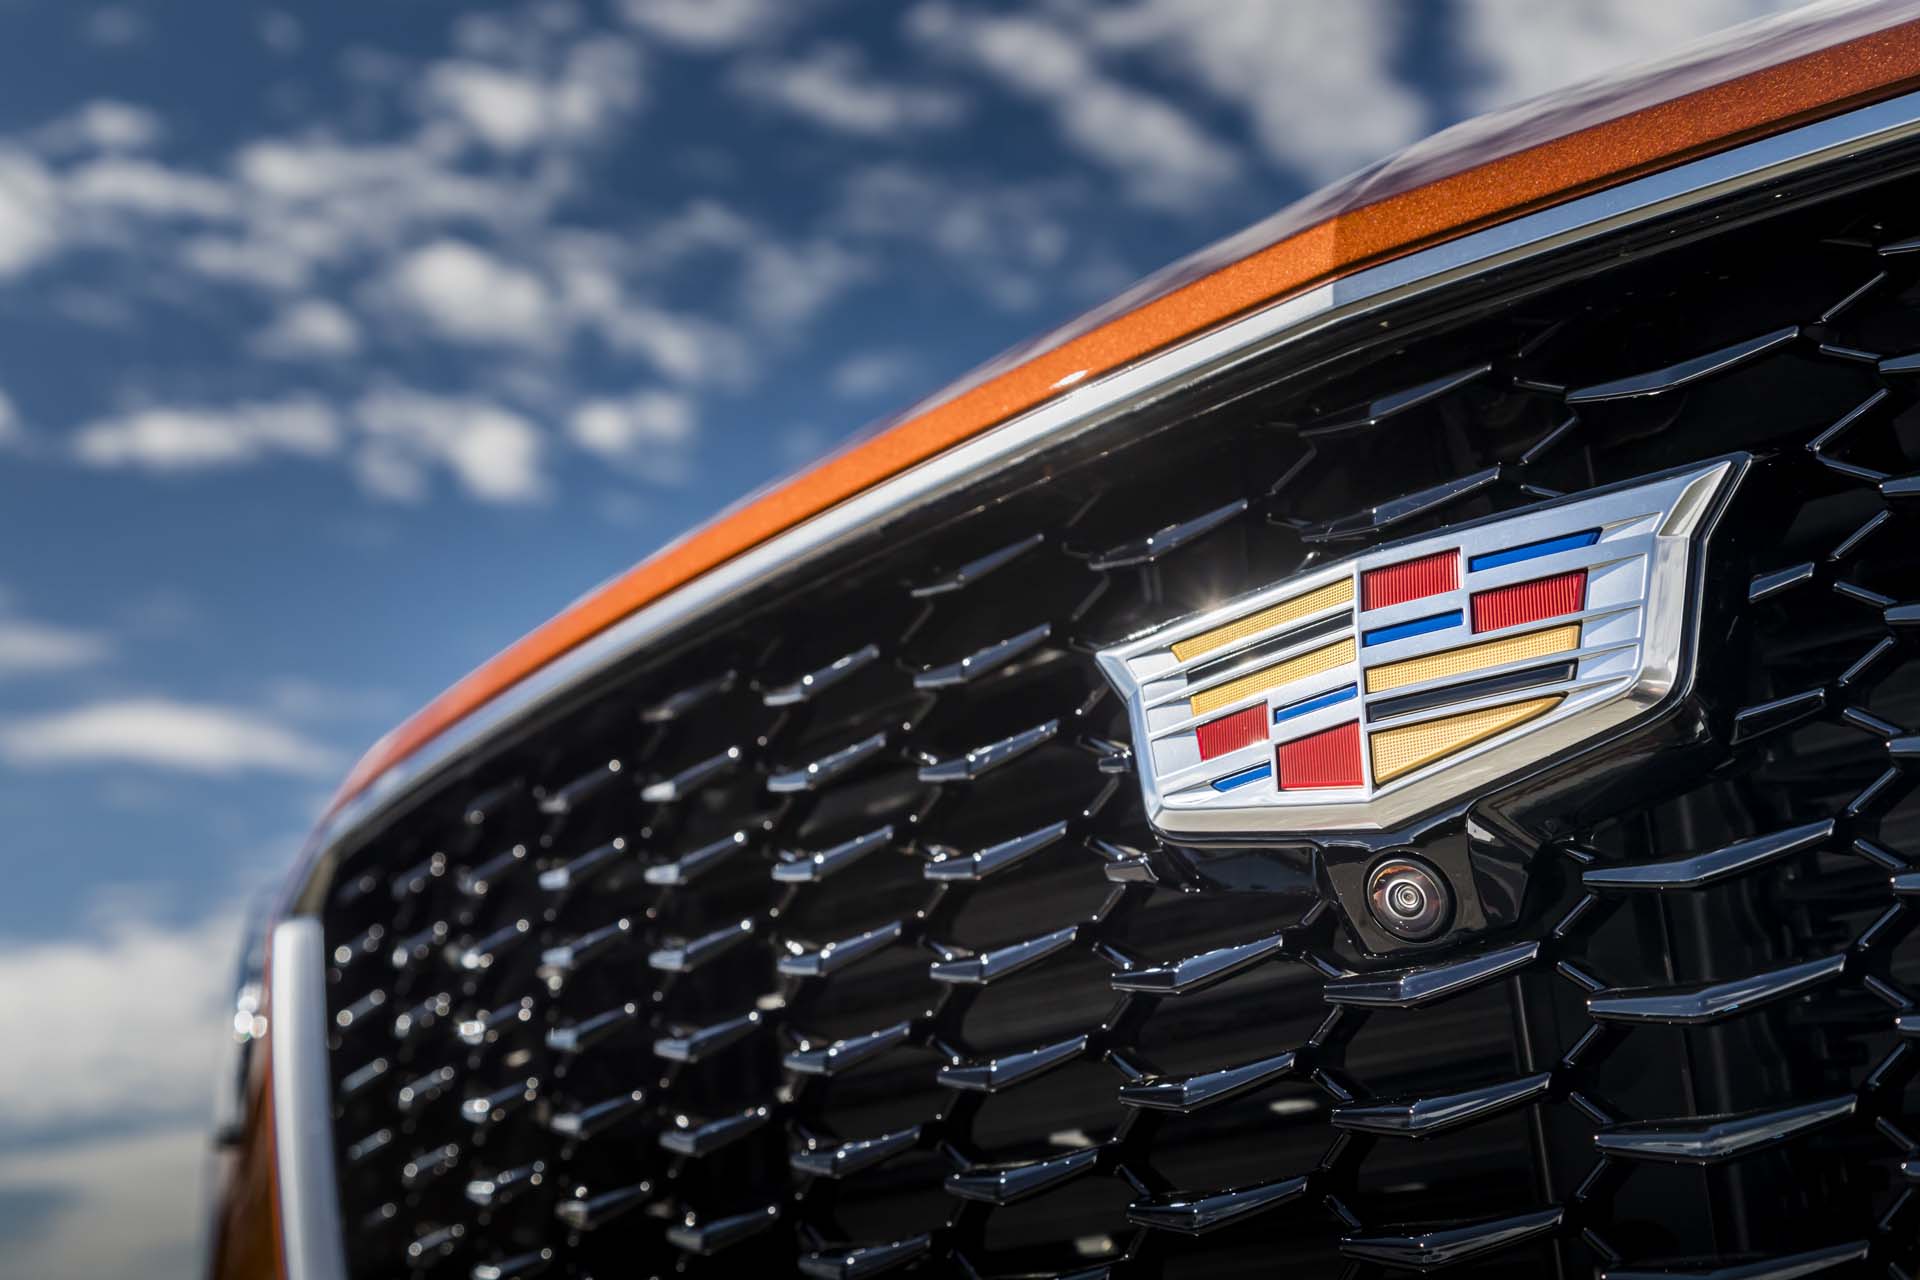 Cadillac Moving Its Headquarters Back To Detroit From Latest York Joe